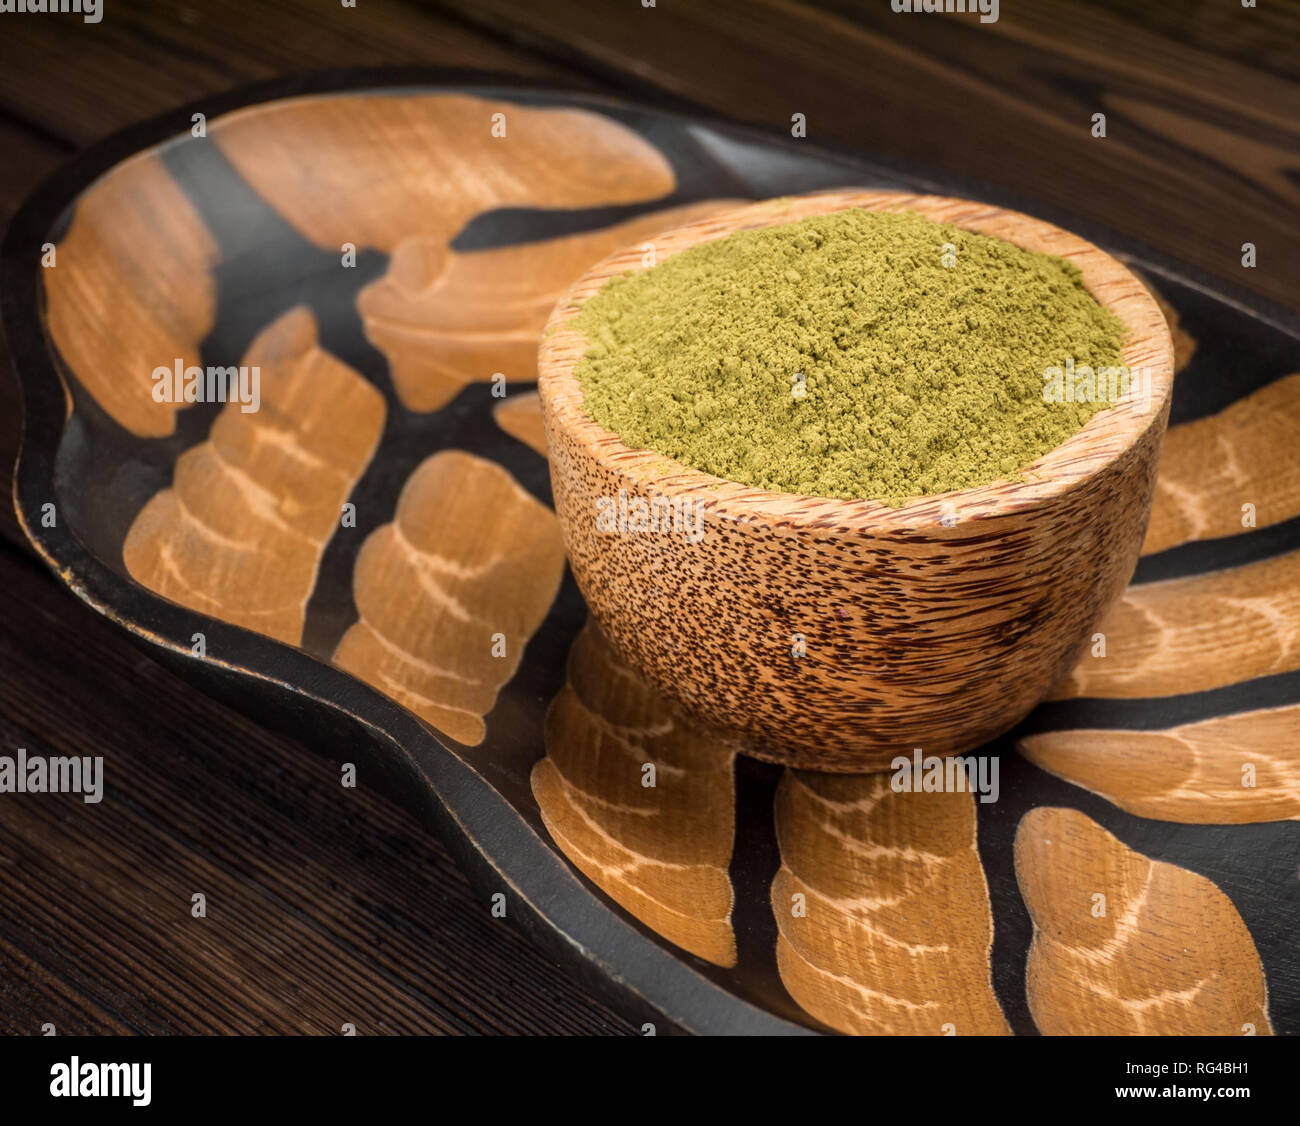 Henna powder hair colourant in the coconut bowl on textured wooden background Stock Photo